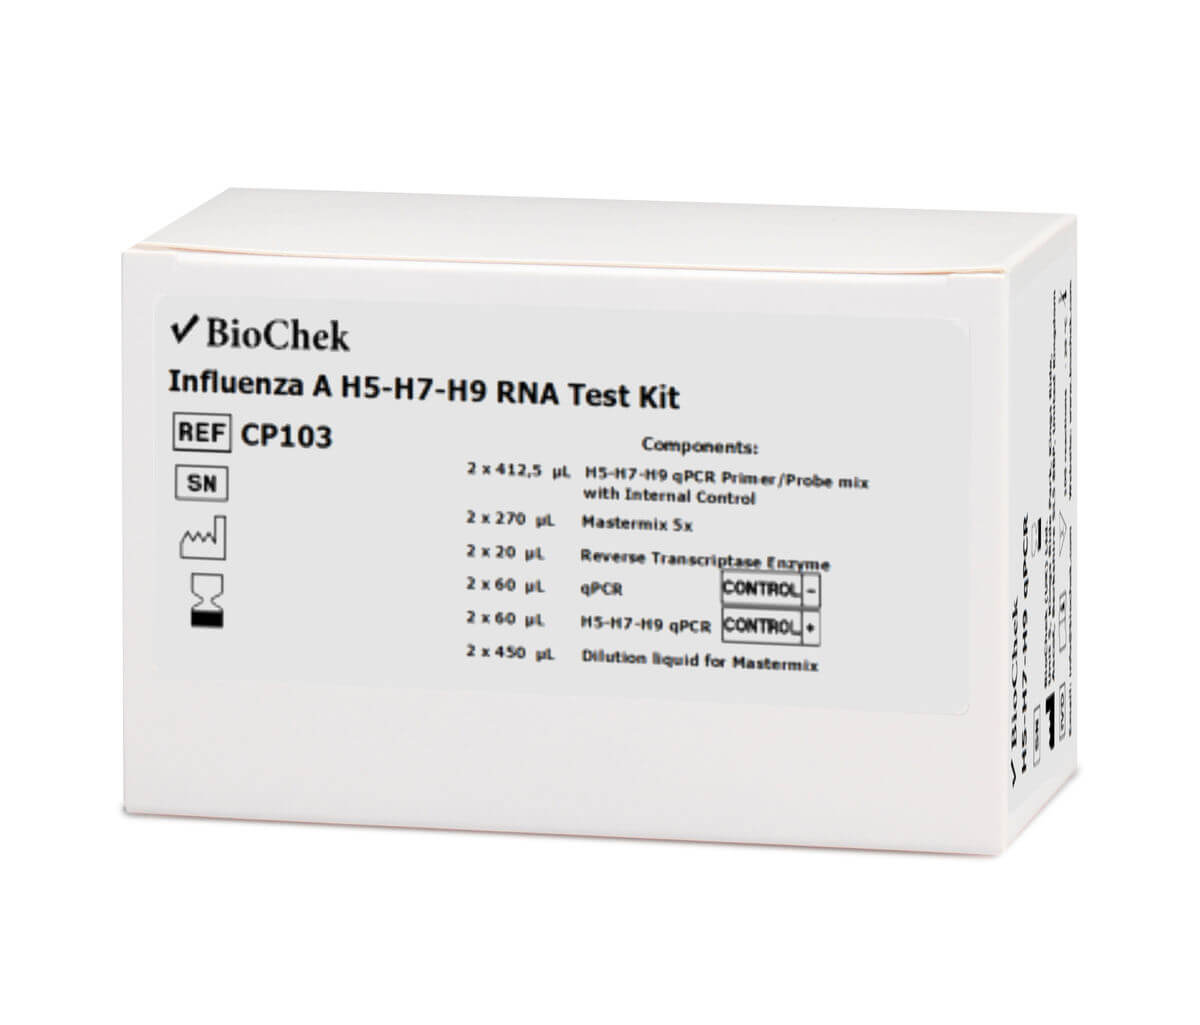 NOW AVAILABLE – Avian Influenza H5-H7-H9 Multiplex PCR test kit